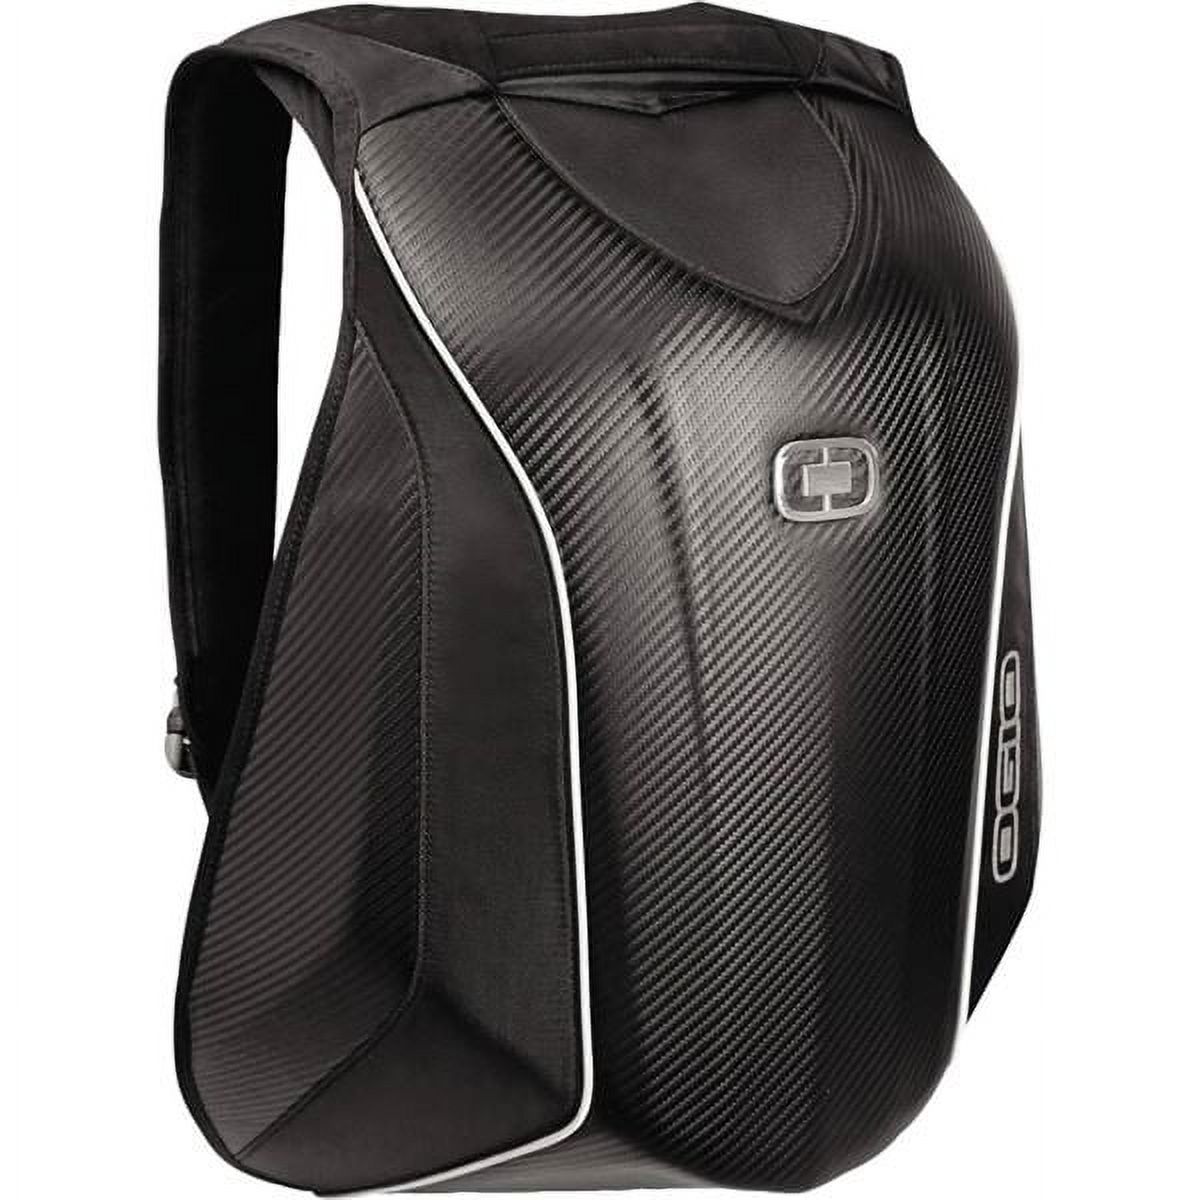 OGIO No Drag Mach 5 Motorcycle Backpack - Stealth Black , 20.5" H x 14.5" W x 7" D, Medium - image 1 of 2